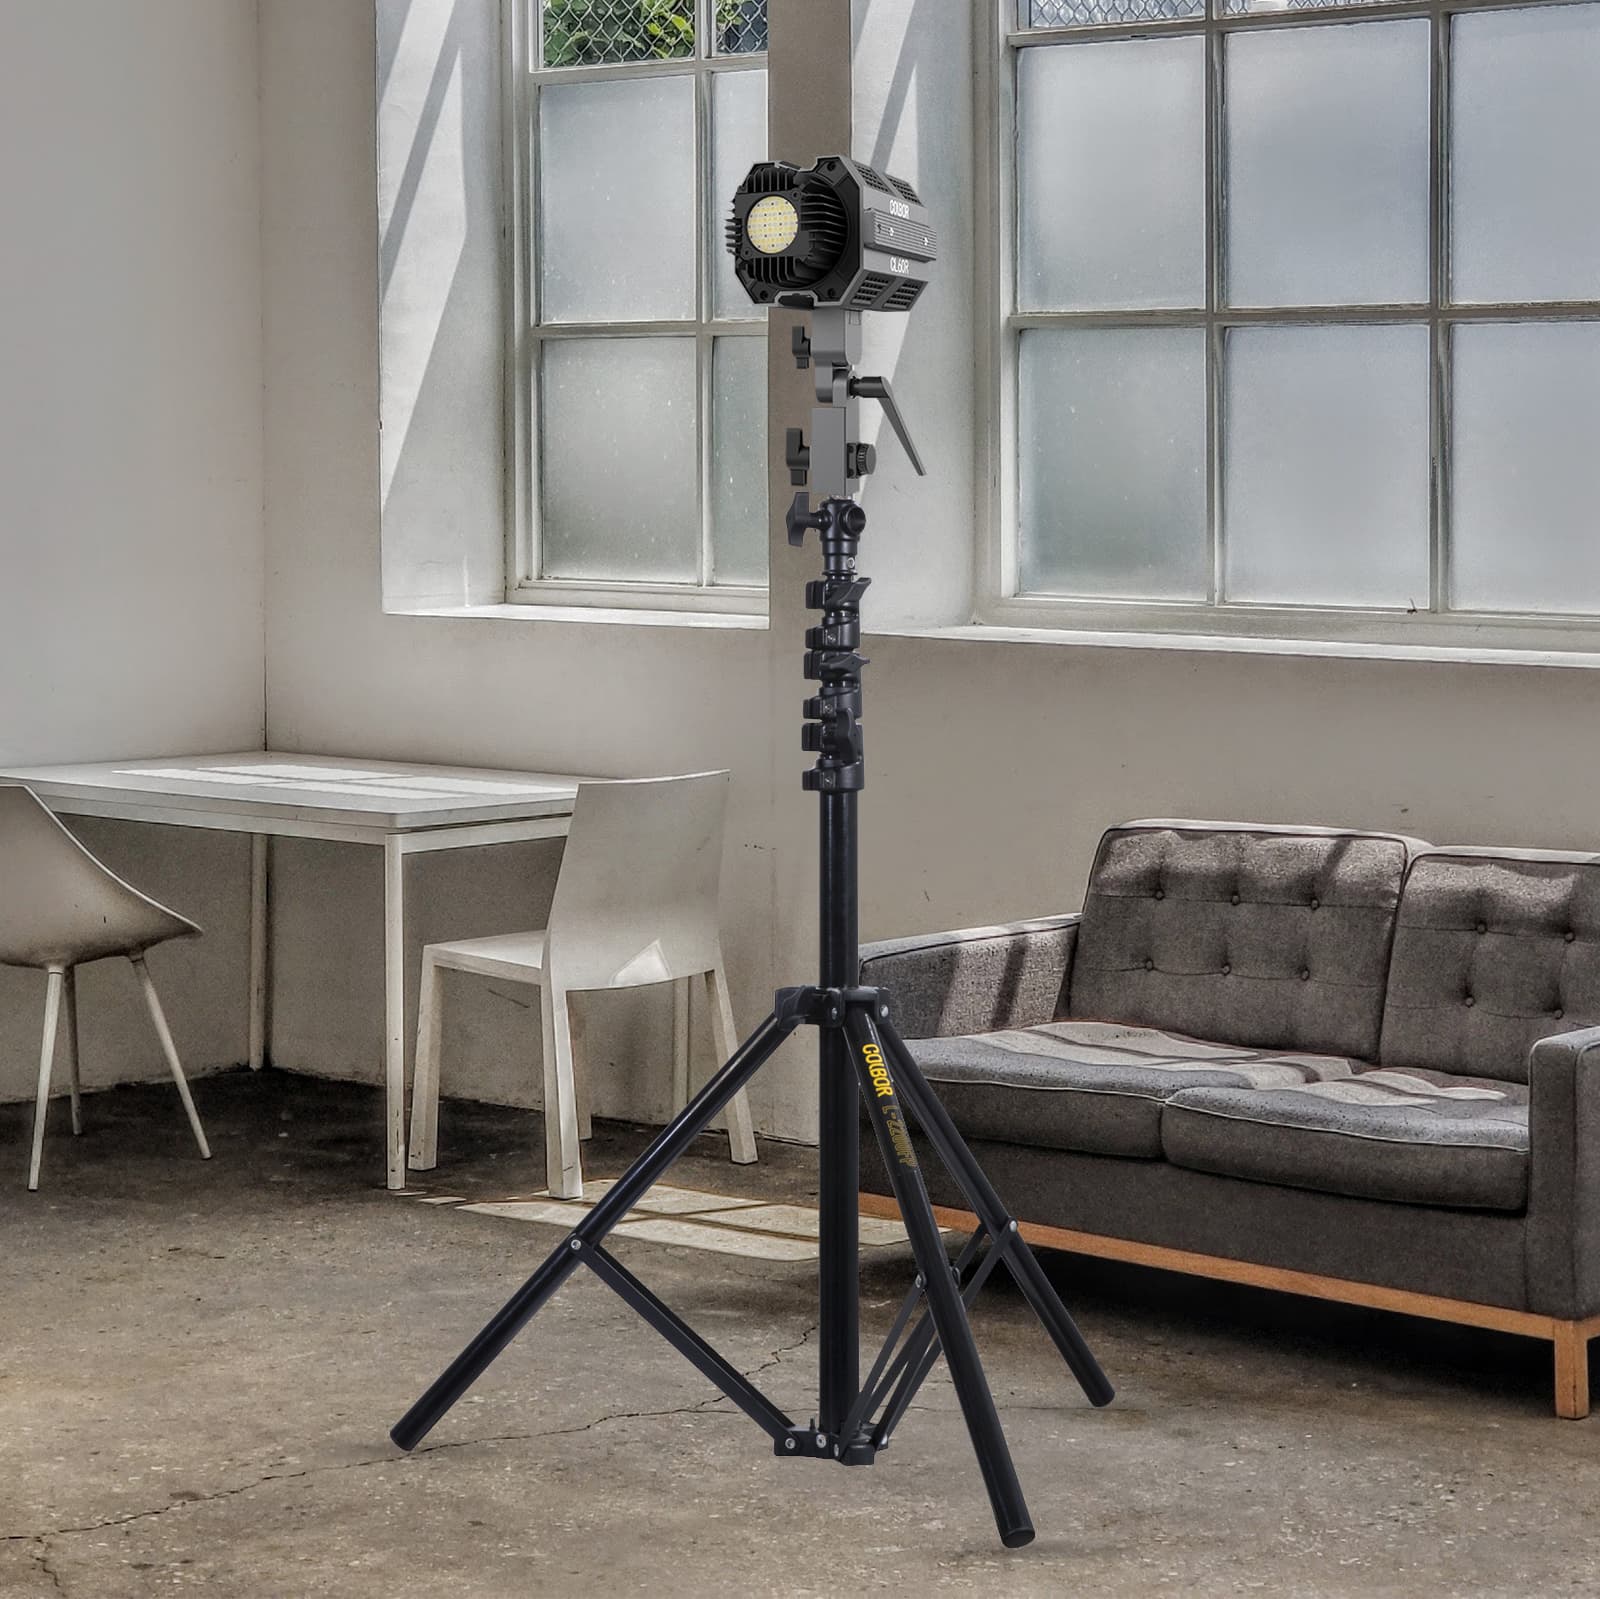 COLBOR 2200FP light stand for video recording is used to support COLBOR CL60R.